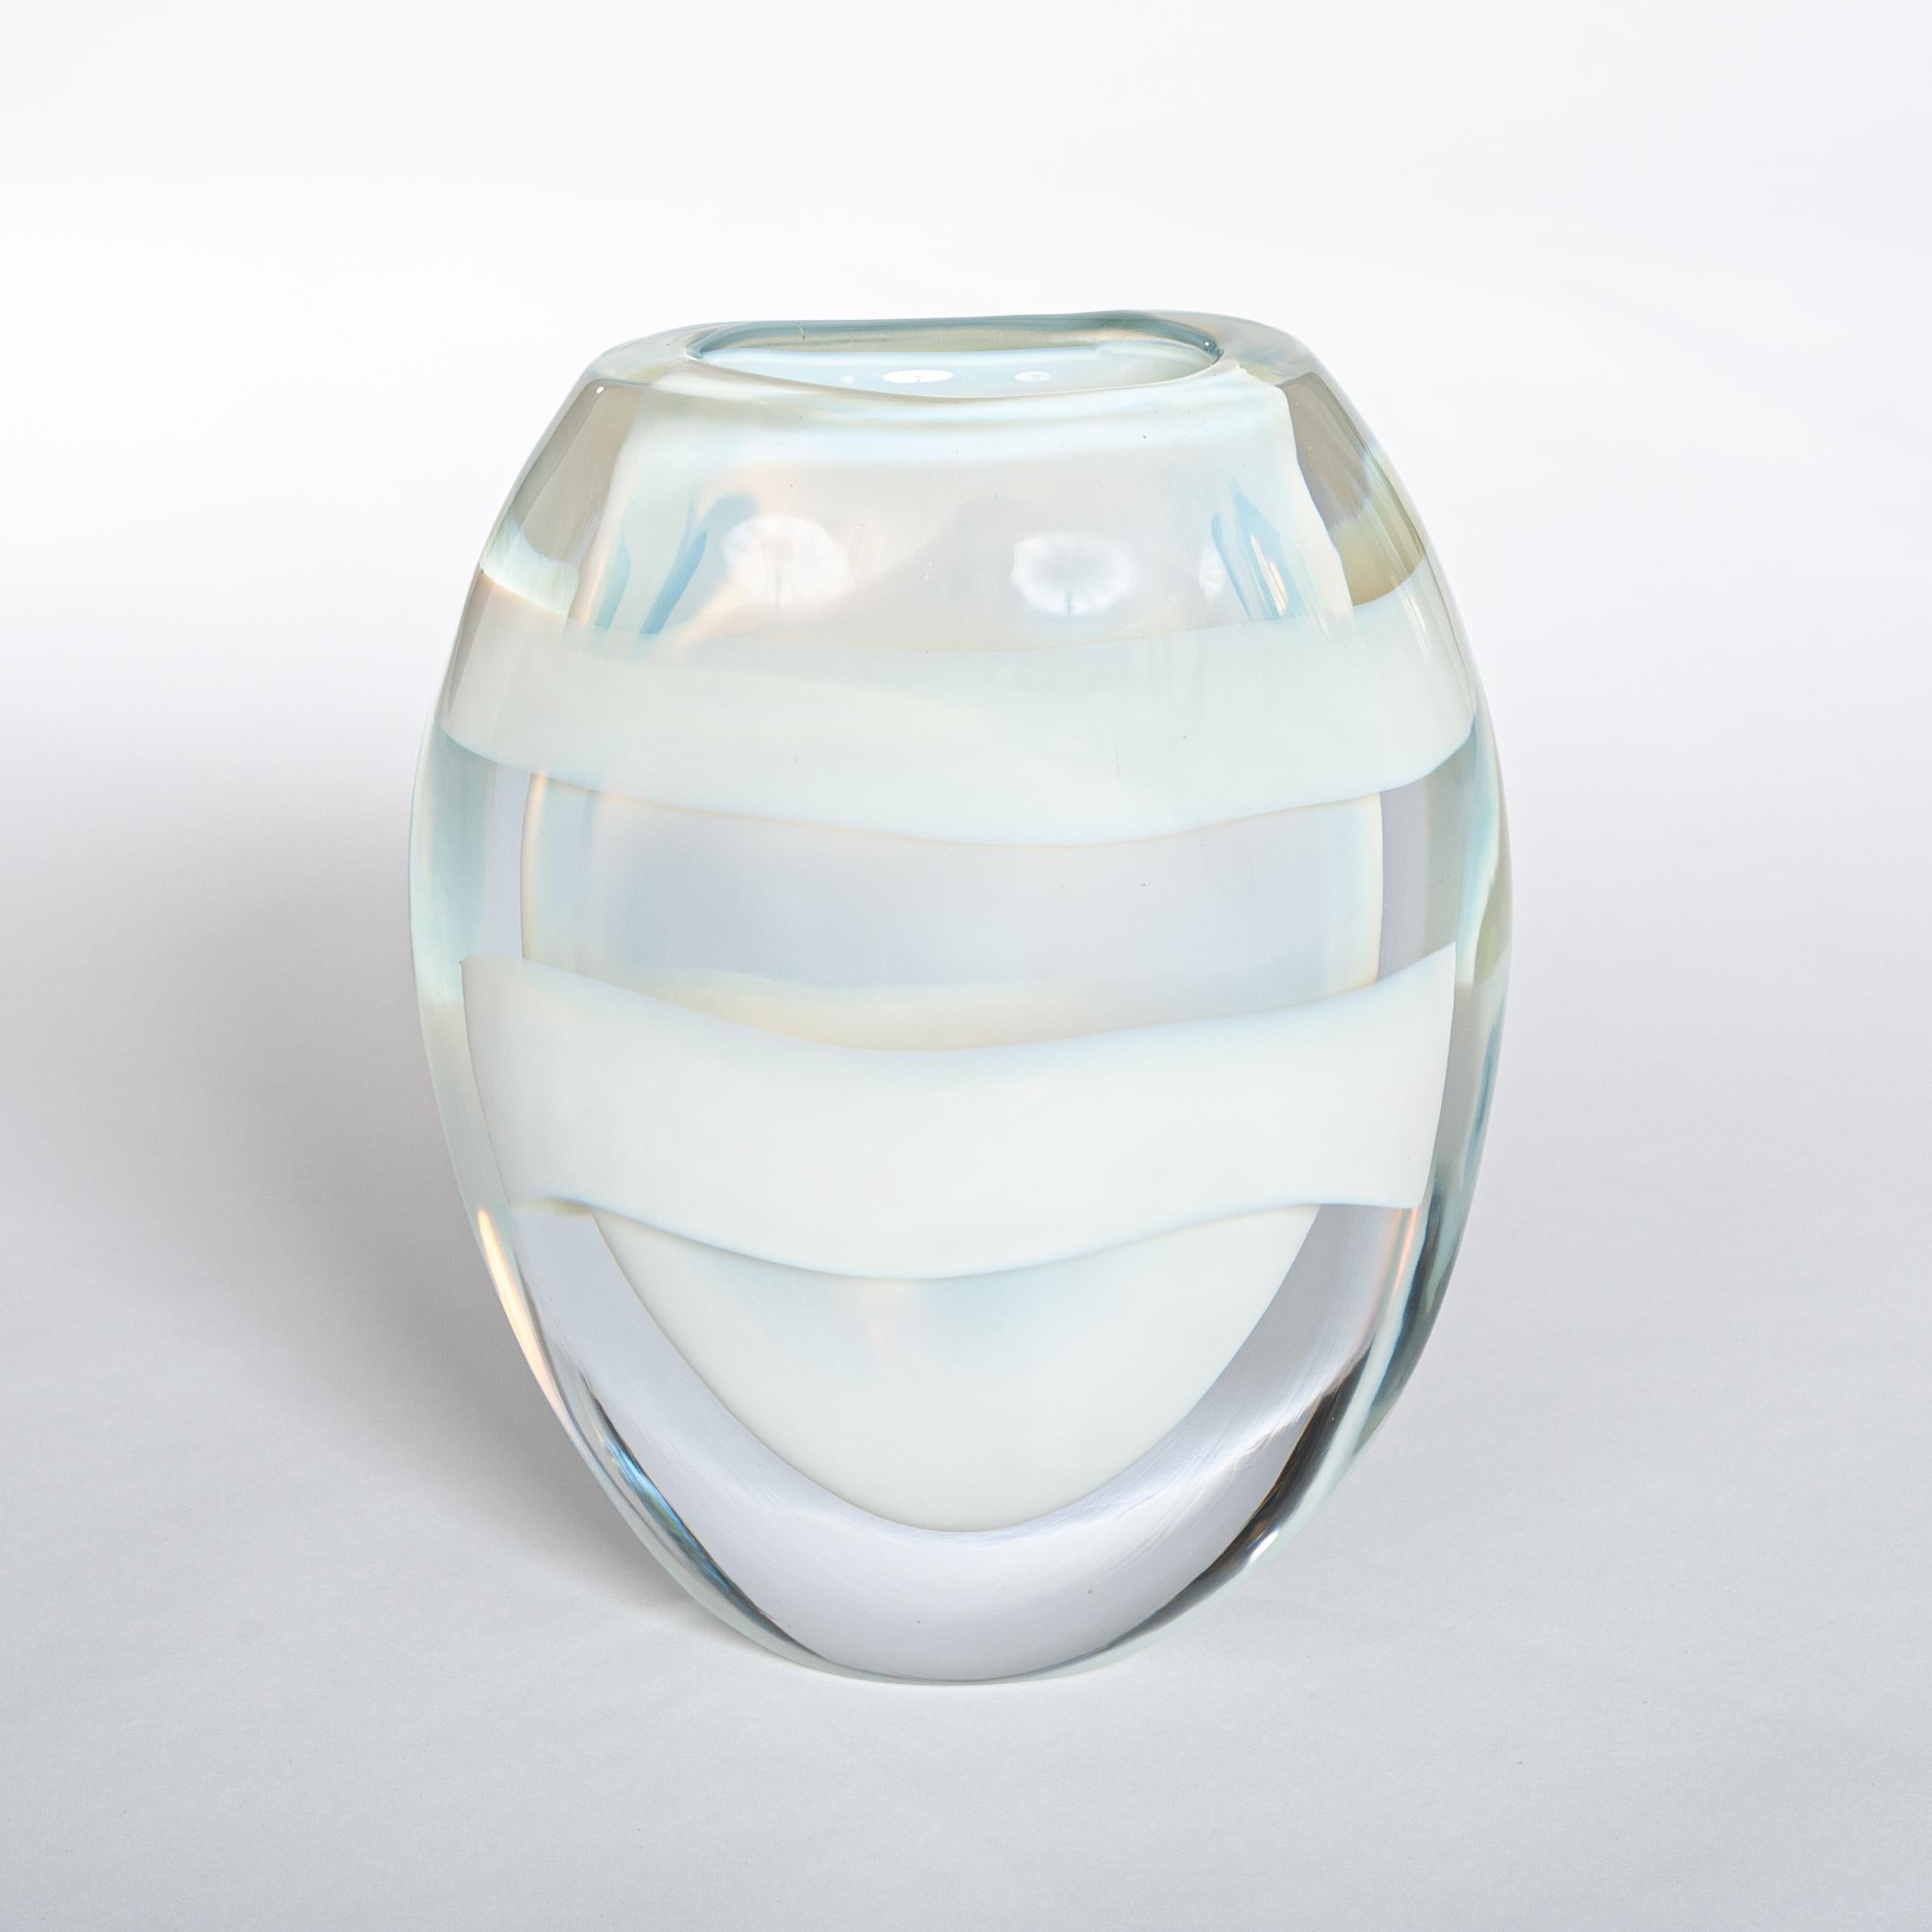 Modern Italian opalescent colored Murano glass vase signed by Pino Signoretto.
A transparent glass object made out of thick glass layers (total 2.5cm) shaped like eggs made in Sommerso Technique with two white circular color stripes.
Hot glass